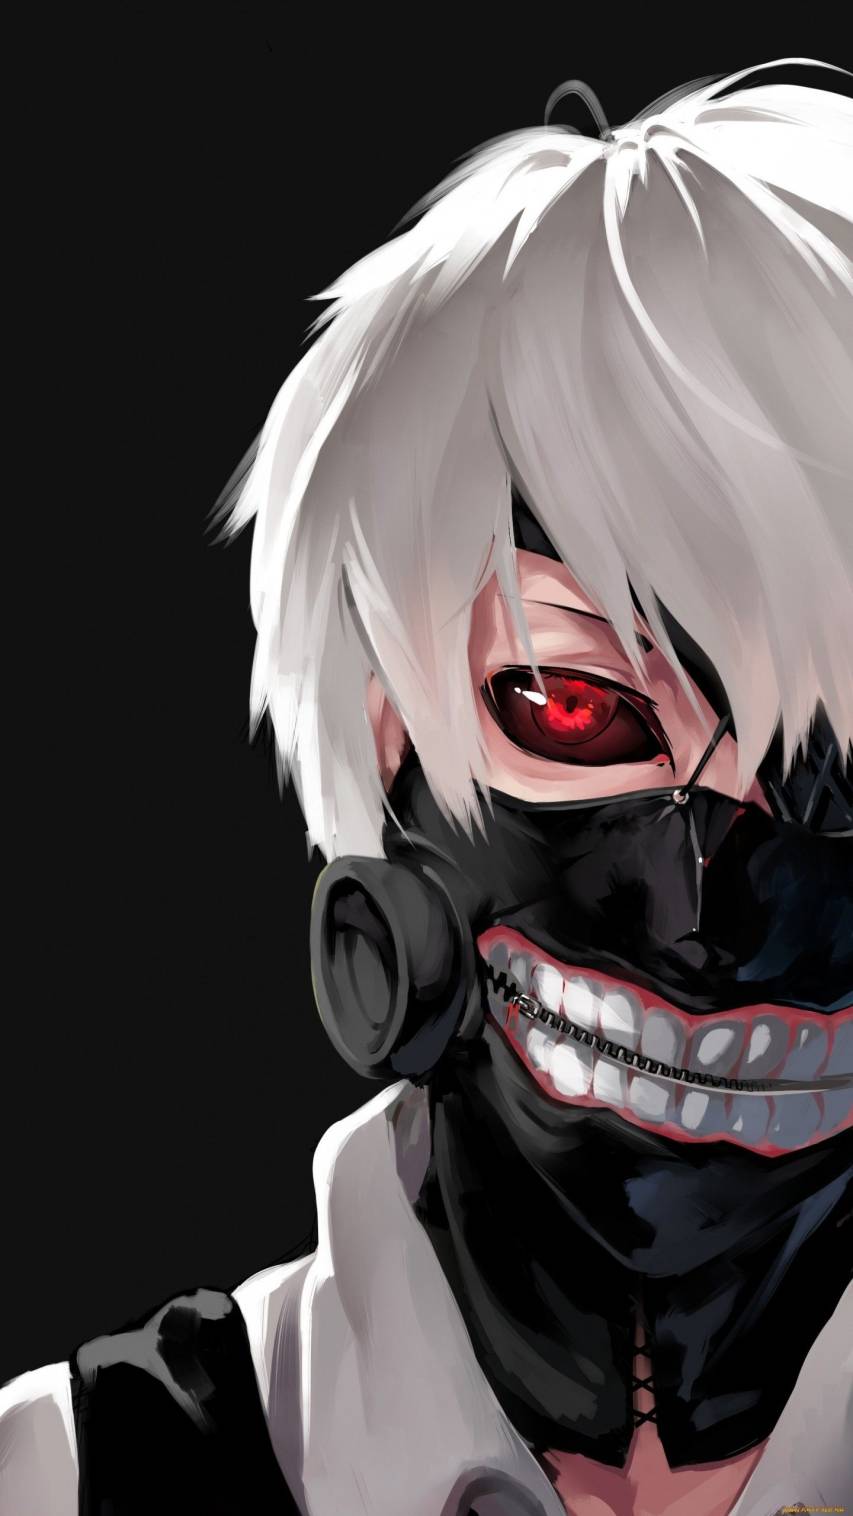 Tokyo Ghoul free Wallpaper images for iPhone